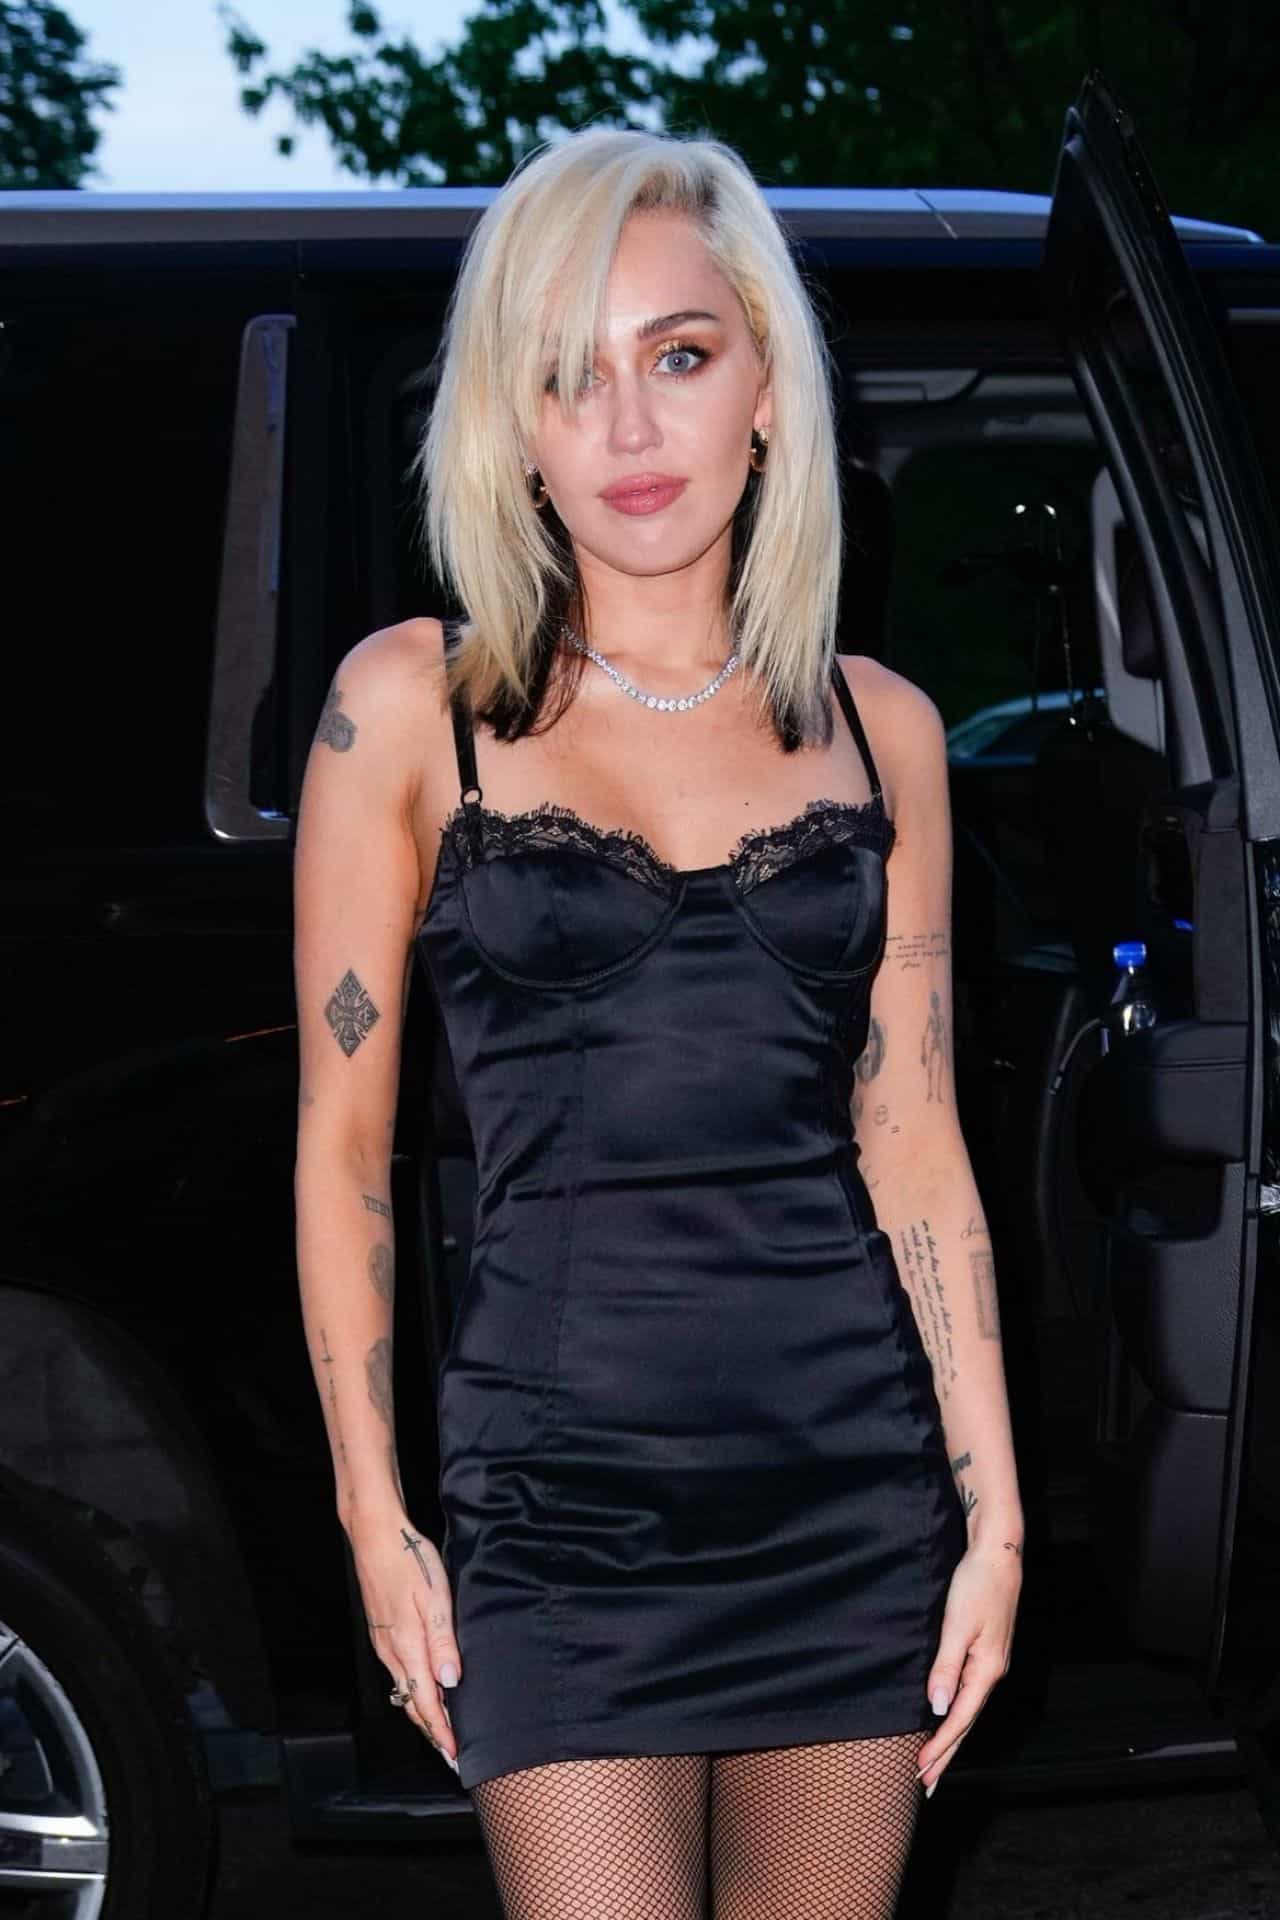 Miley Cyrus Stuns in a Chic Black Négligée at NBC Upfronts Dinner